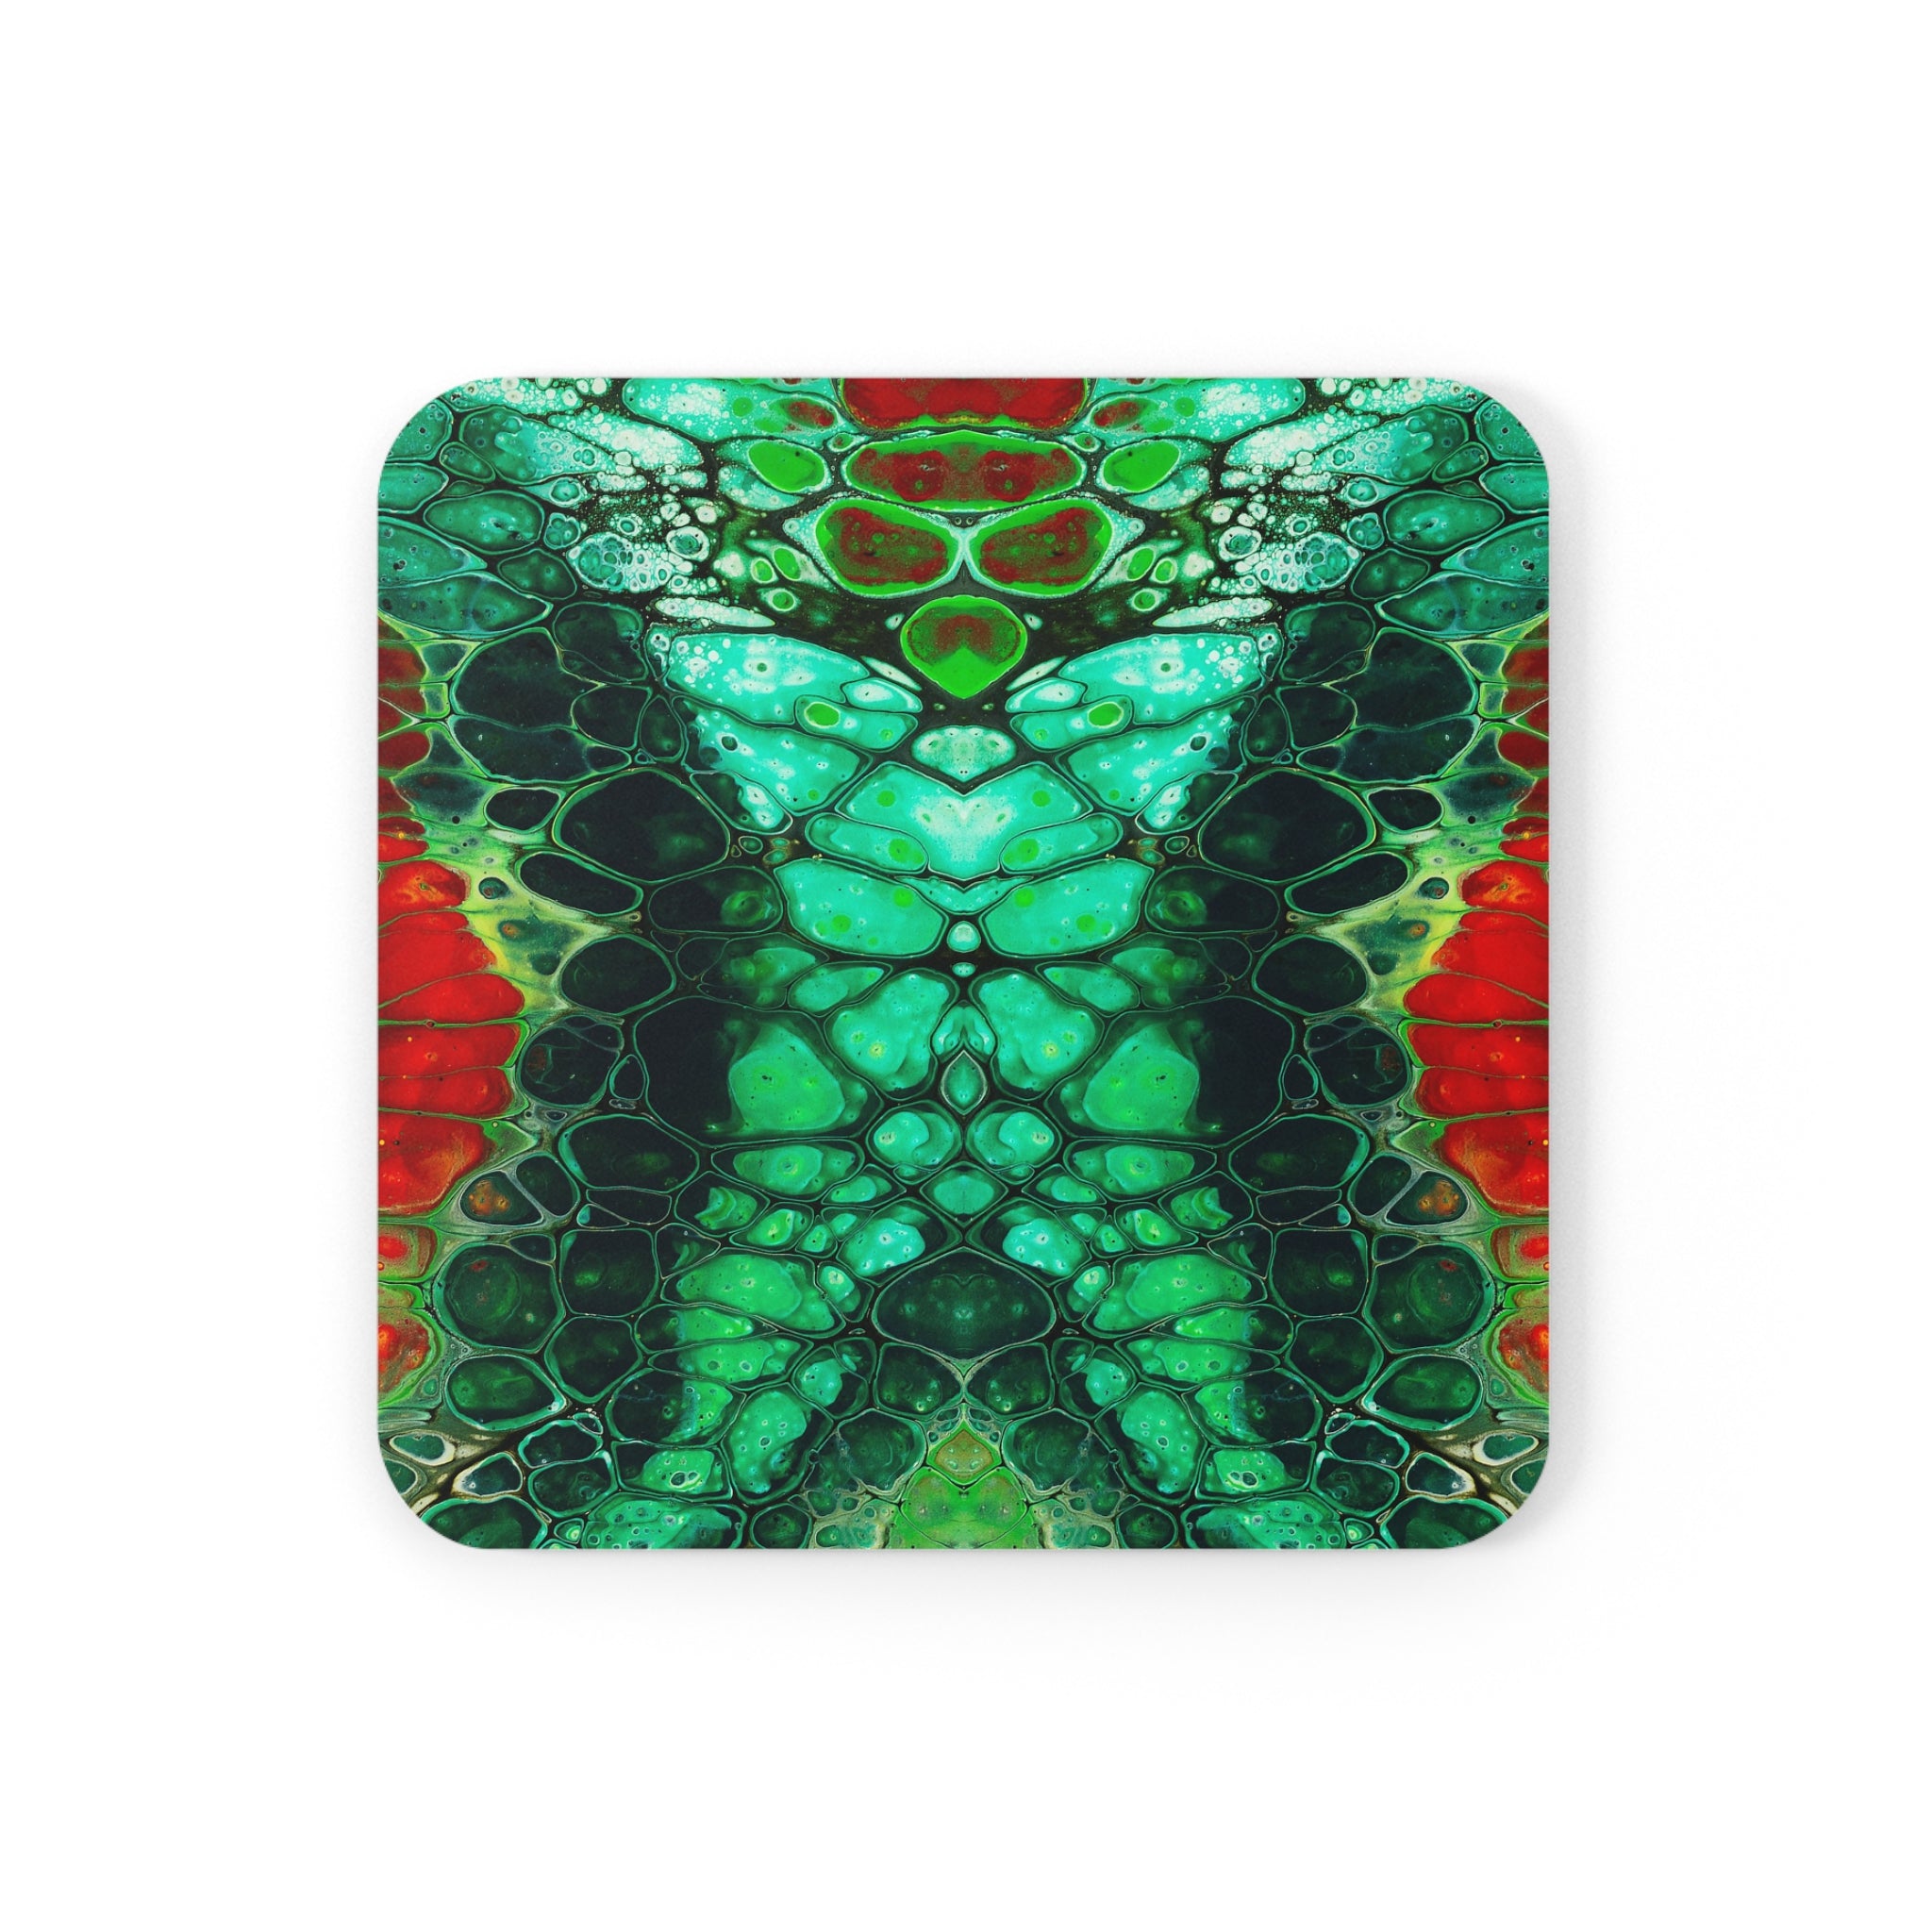 Cameron Creations - Celltopia Constellation - Stylish Coffee Coaster - Square Front